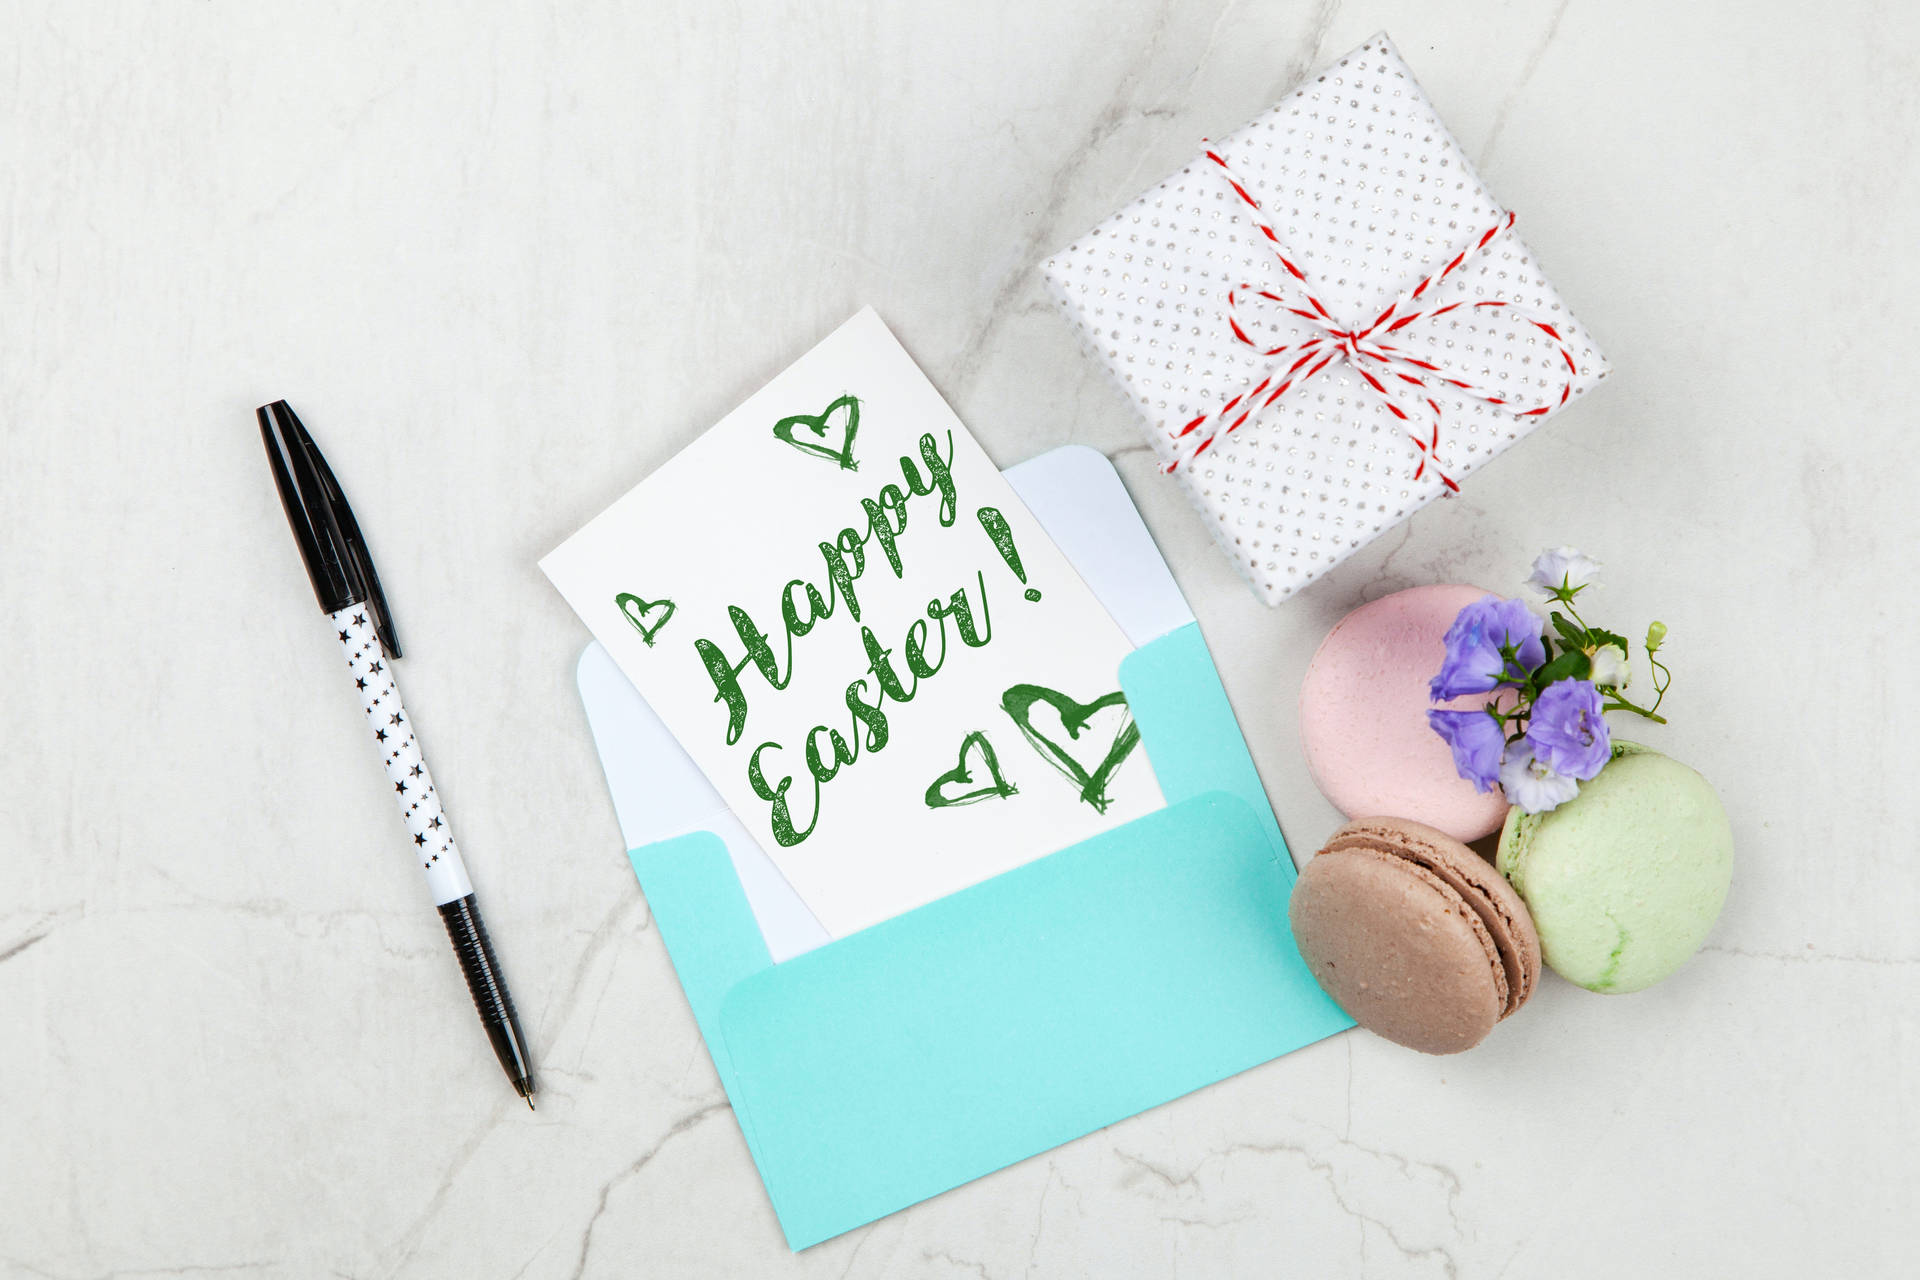 Happy Easter Green Letter Flat Lay Background